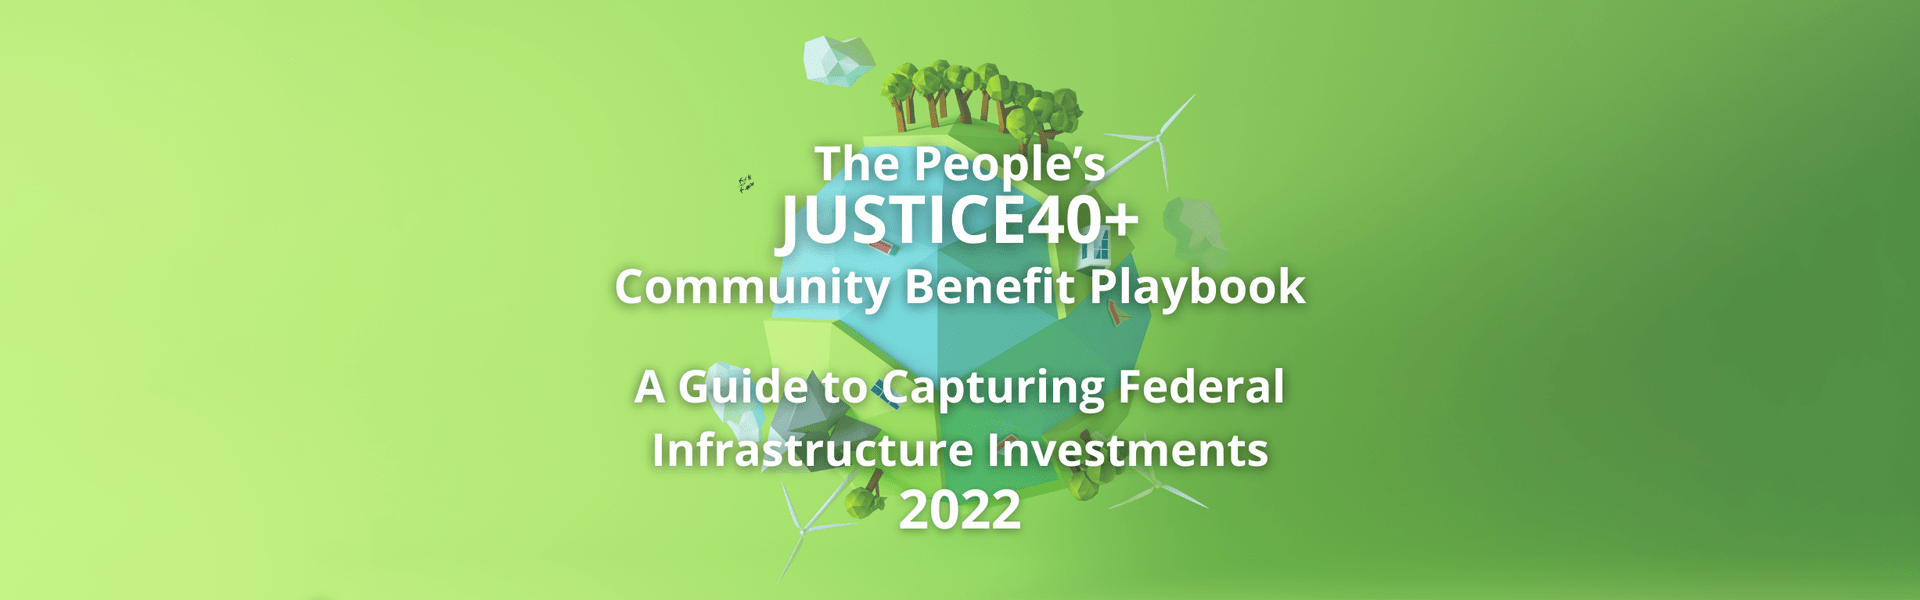 The People's Justice 40 Playbook